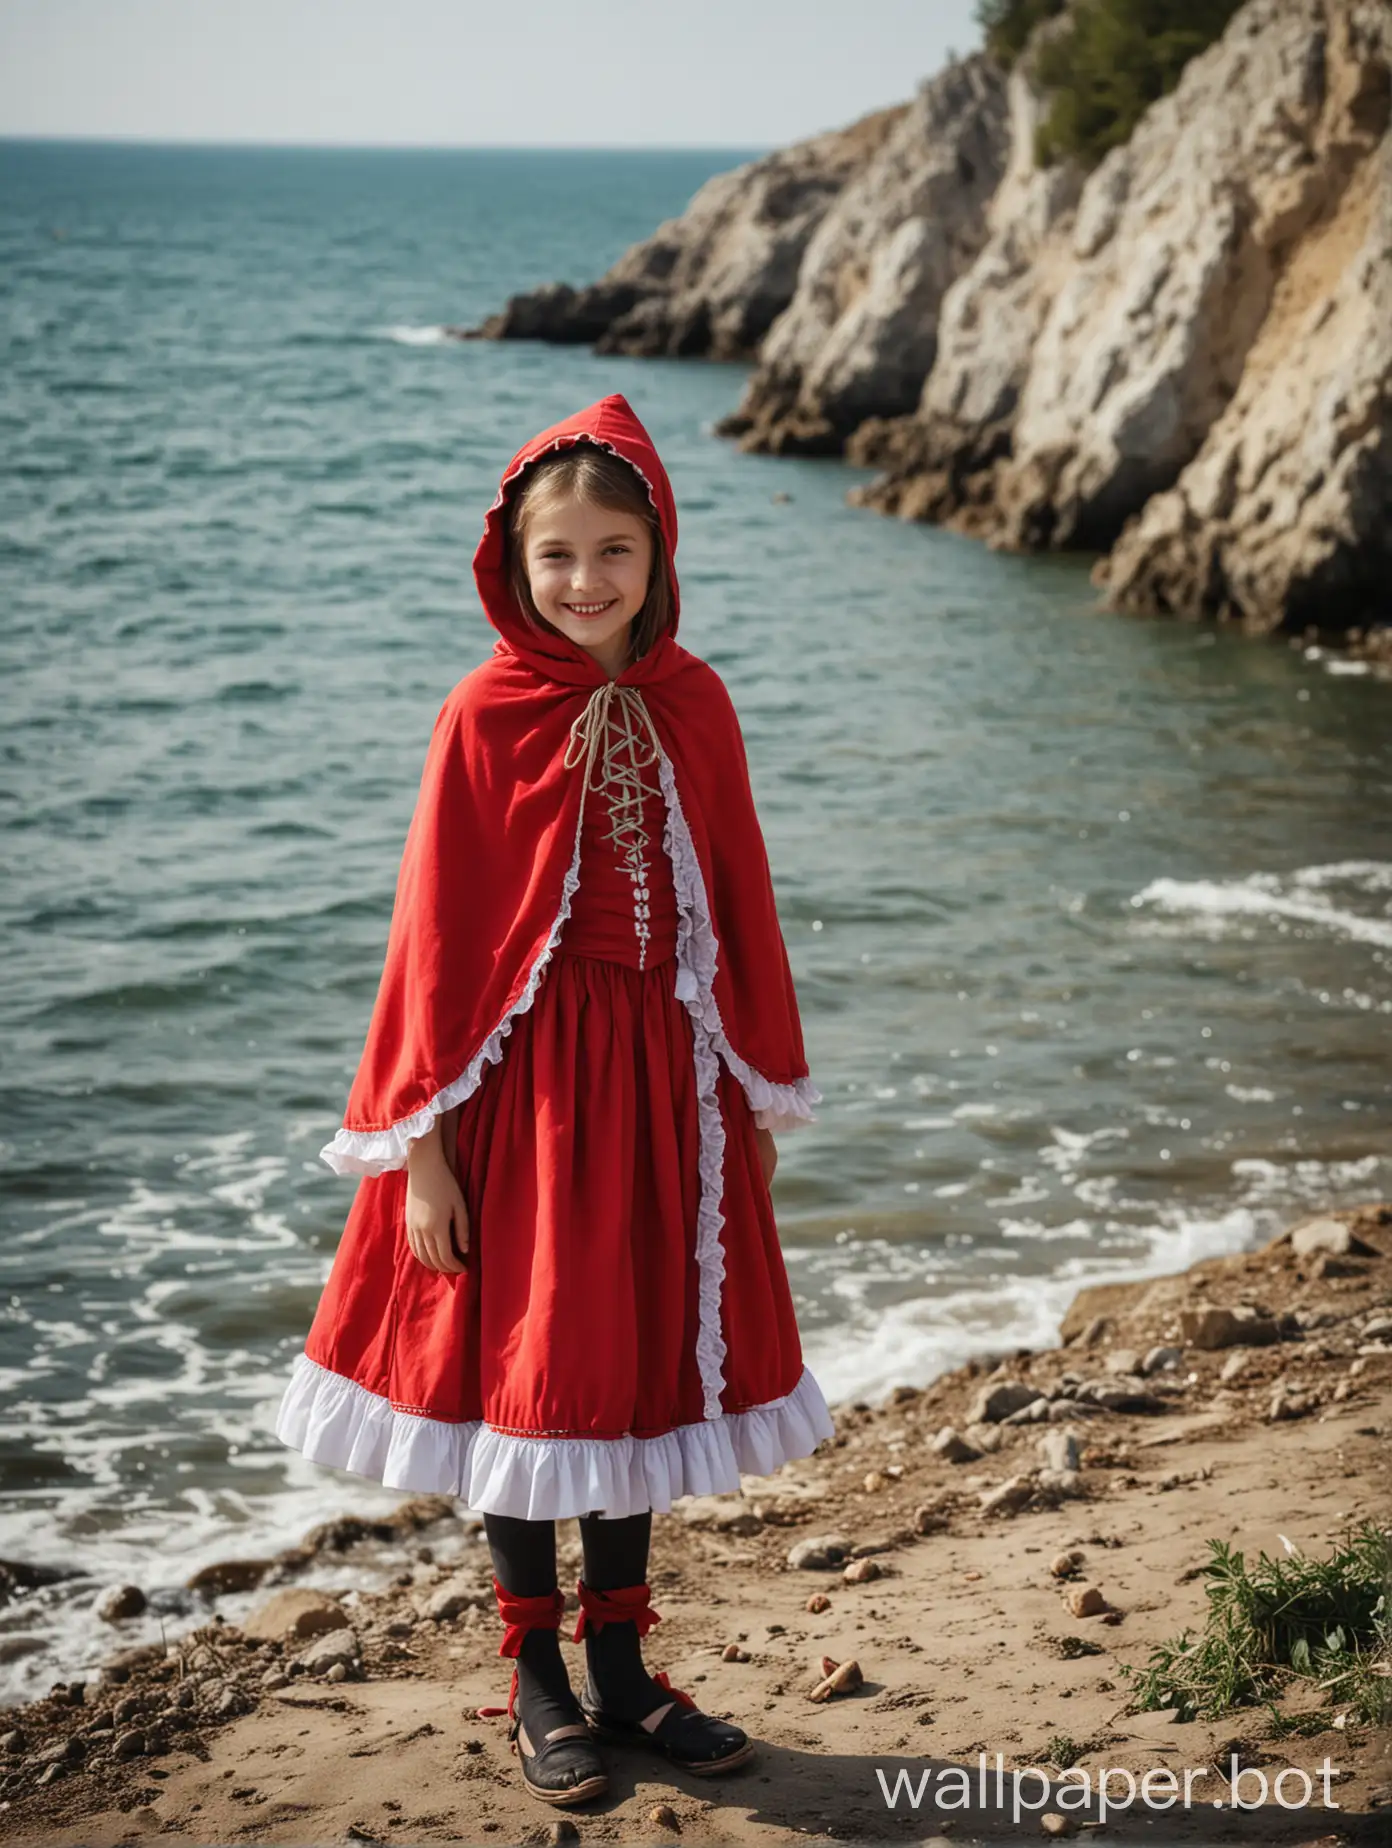 Crimea, view of the sea, a 10-year-old girl in a red riding hood costume, full-length, smiling